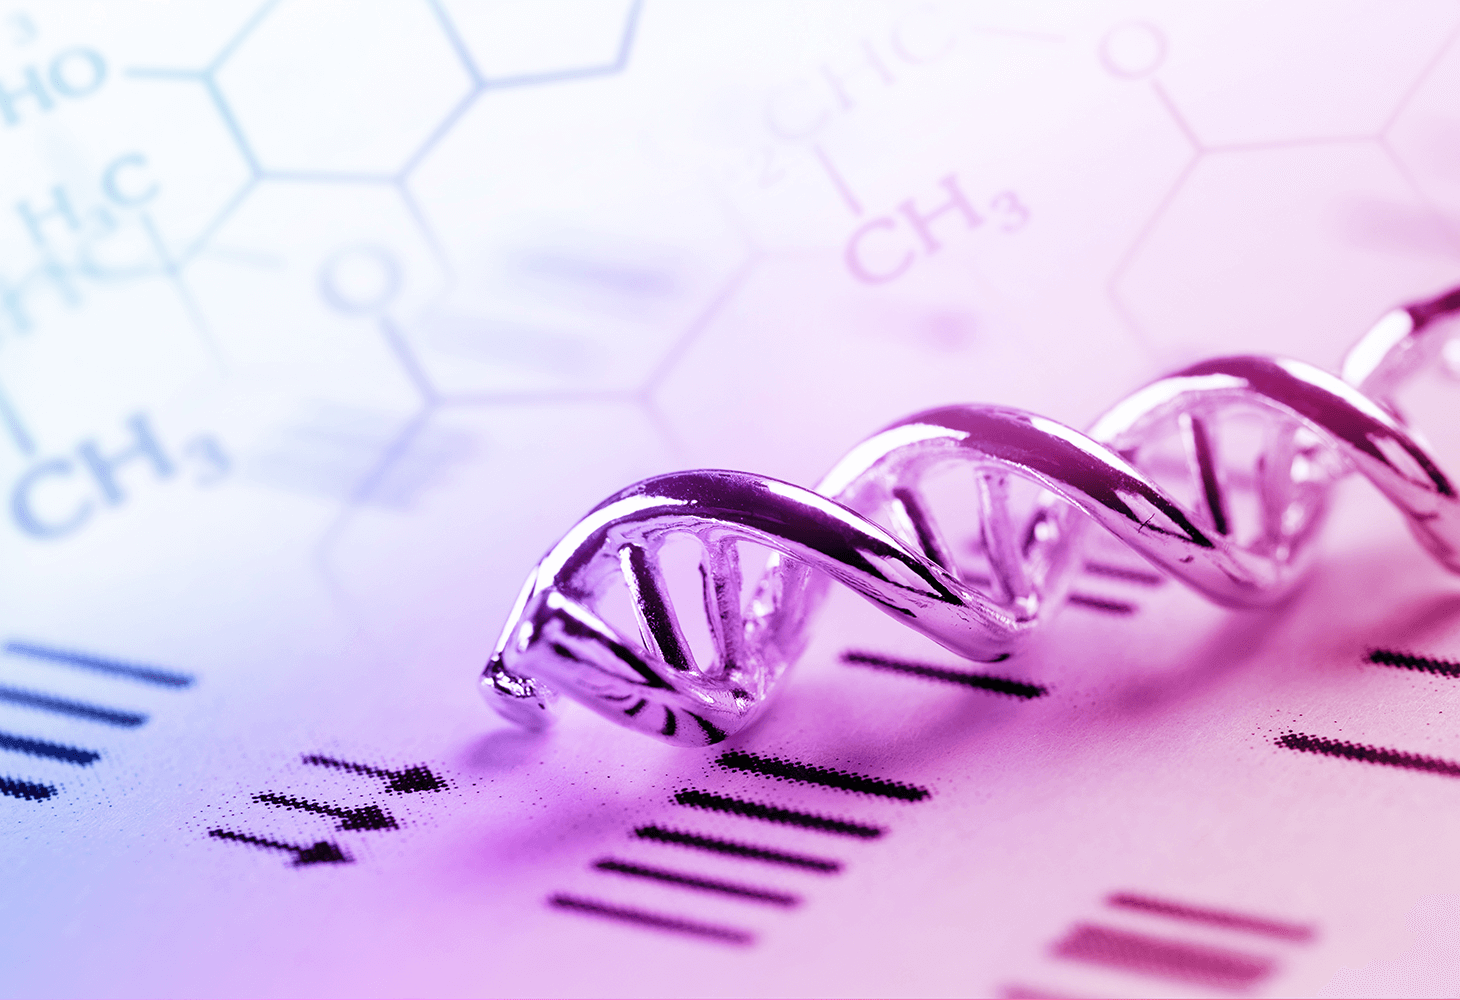 3D illustration of DNA sitting on images showing genetic data and molecular composition